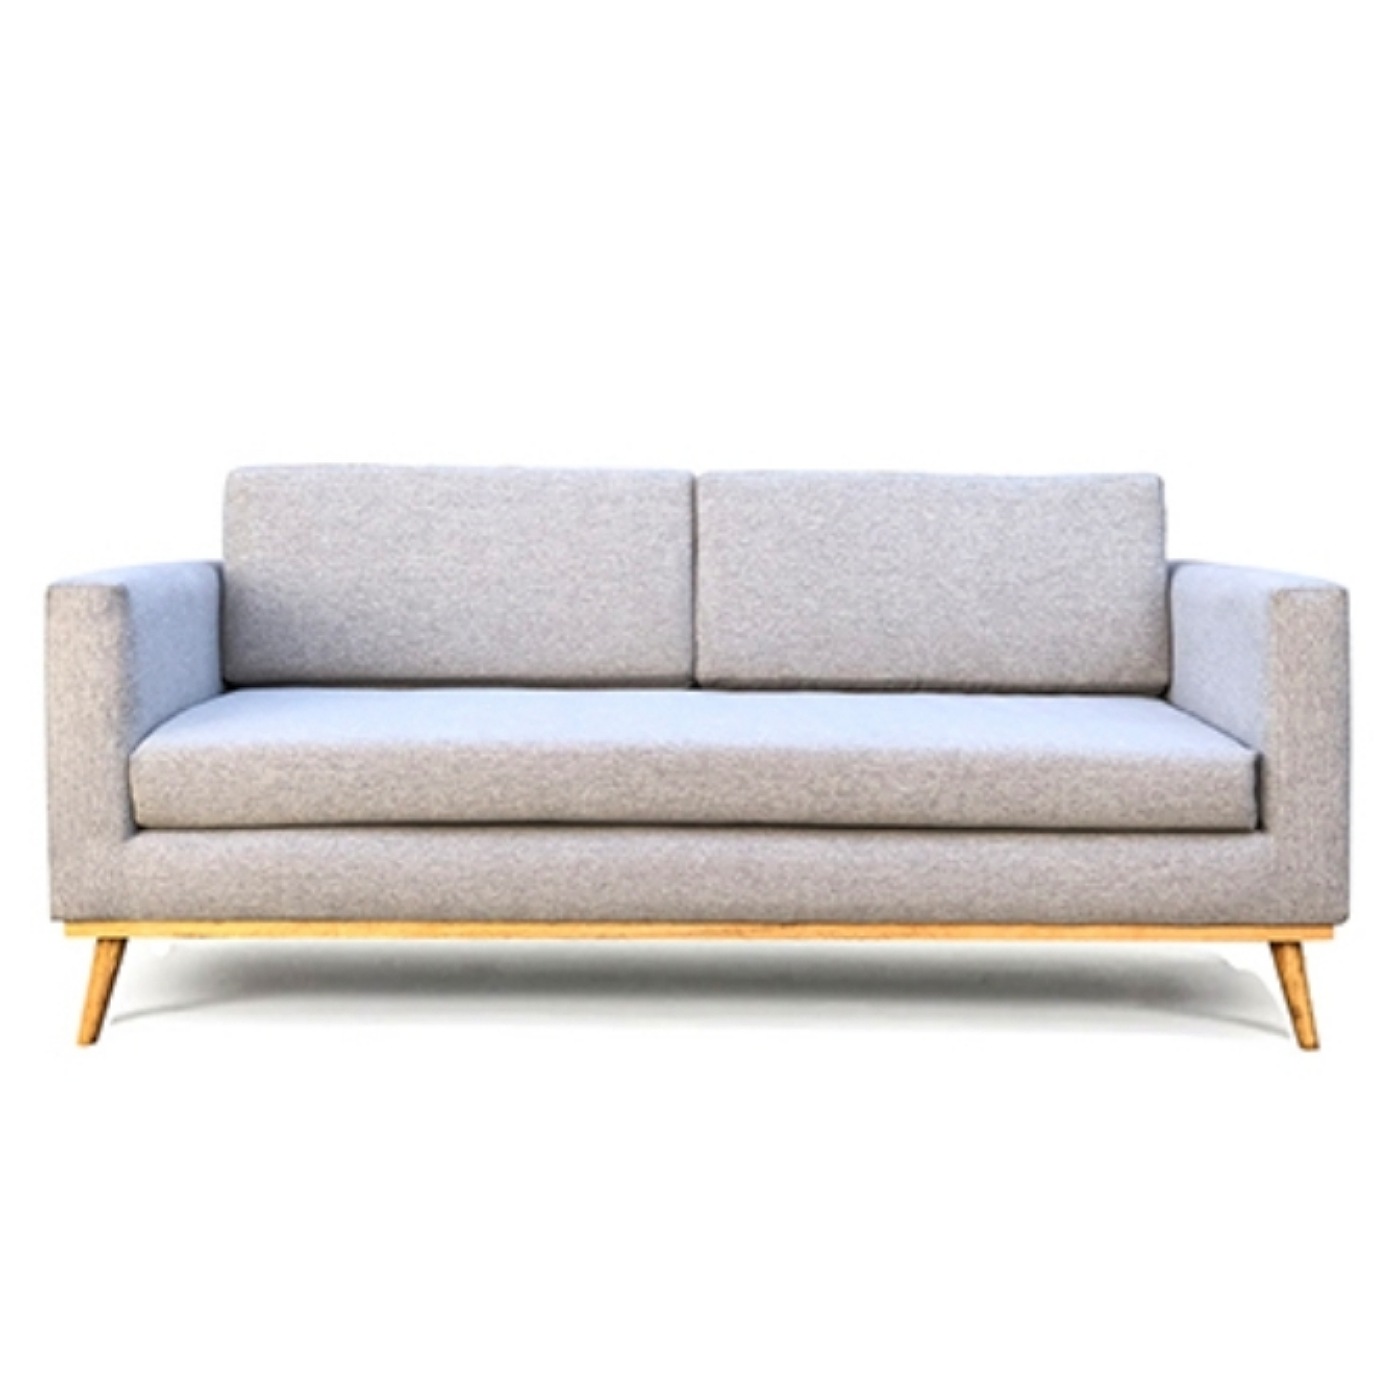 Two Seat Grey Fabric Couch With Wooden Legs.